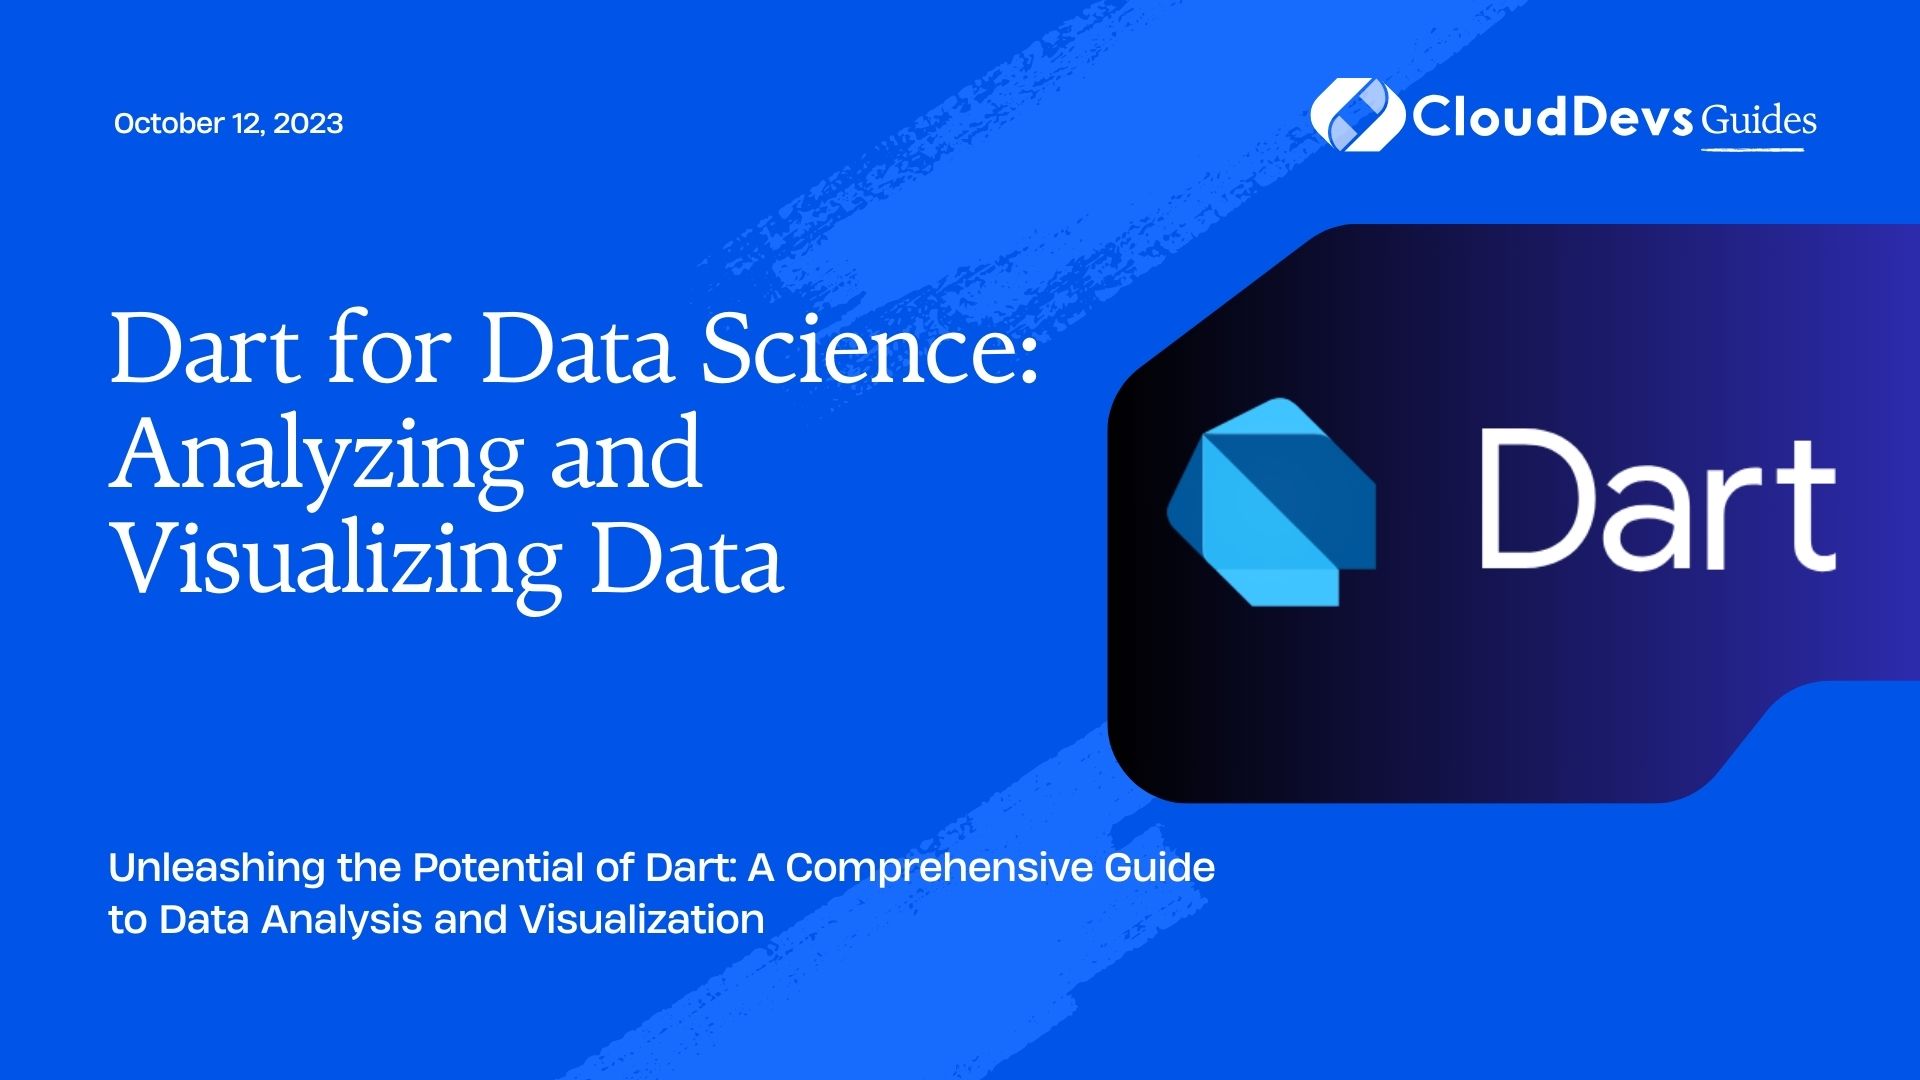 Dart for Data Science: Analyzing and Visualizing Data